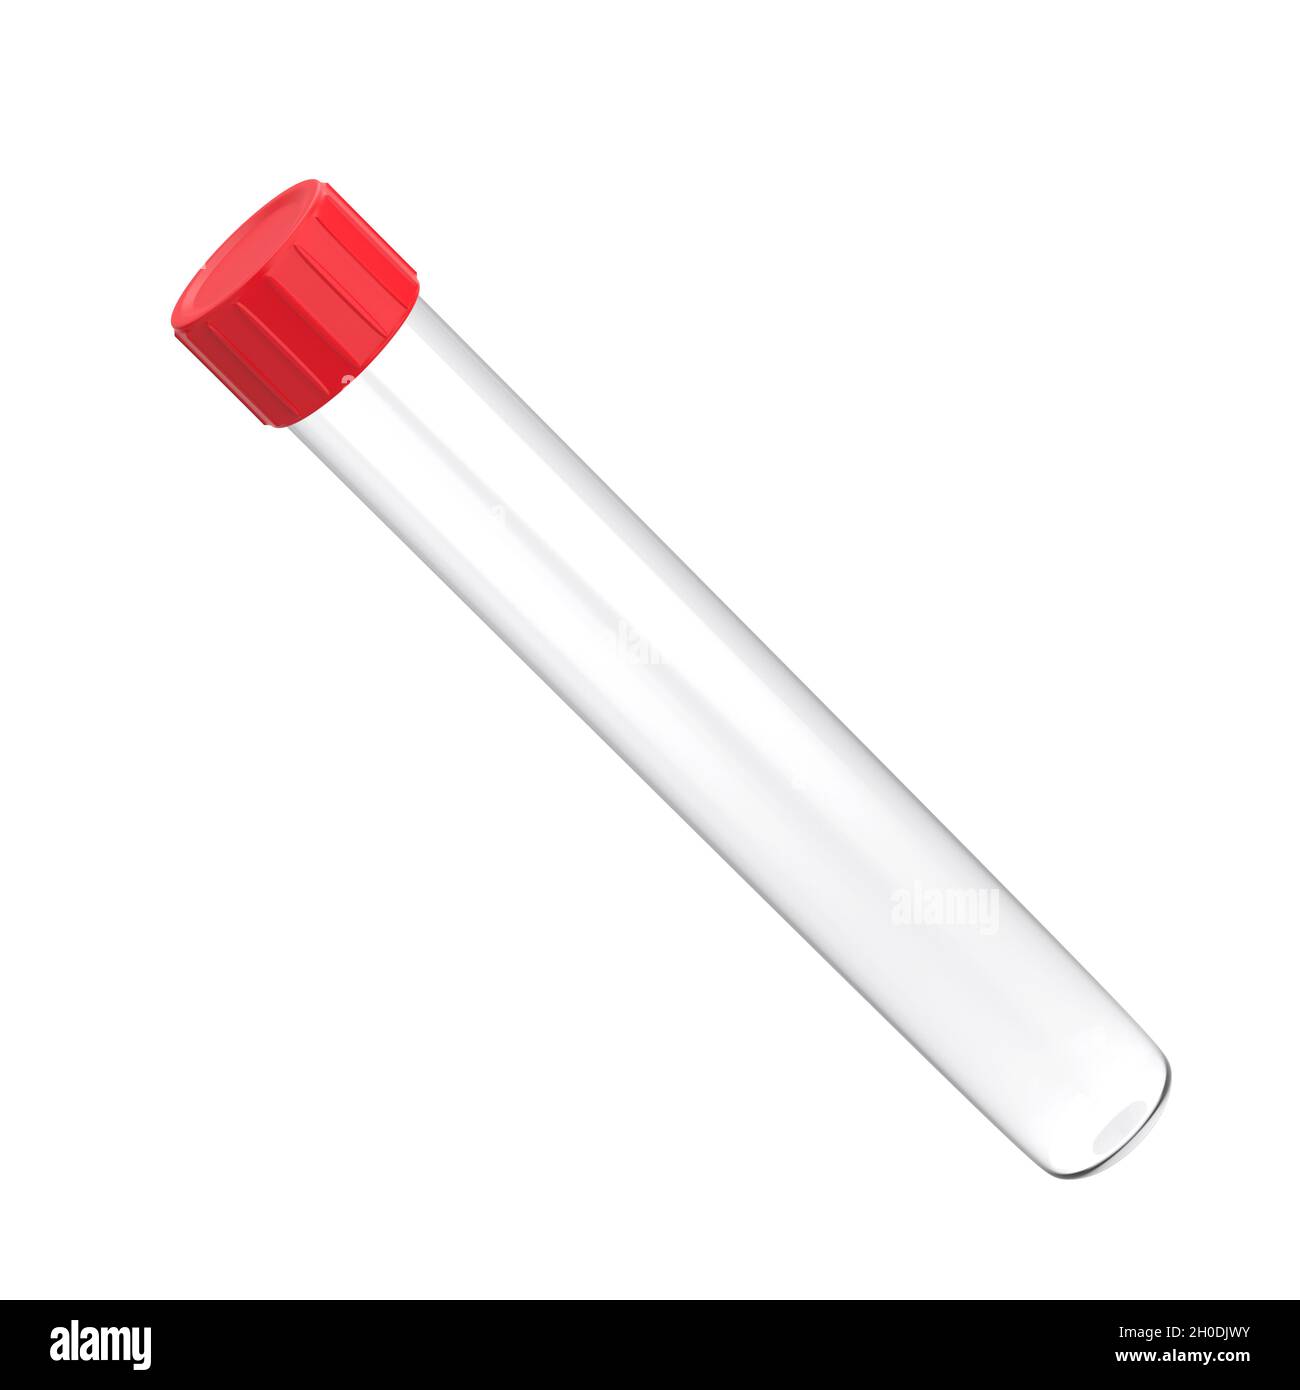 Test tube with red cap isolated on white background Stock Photo